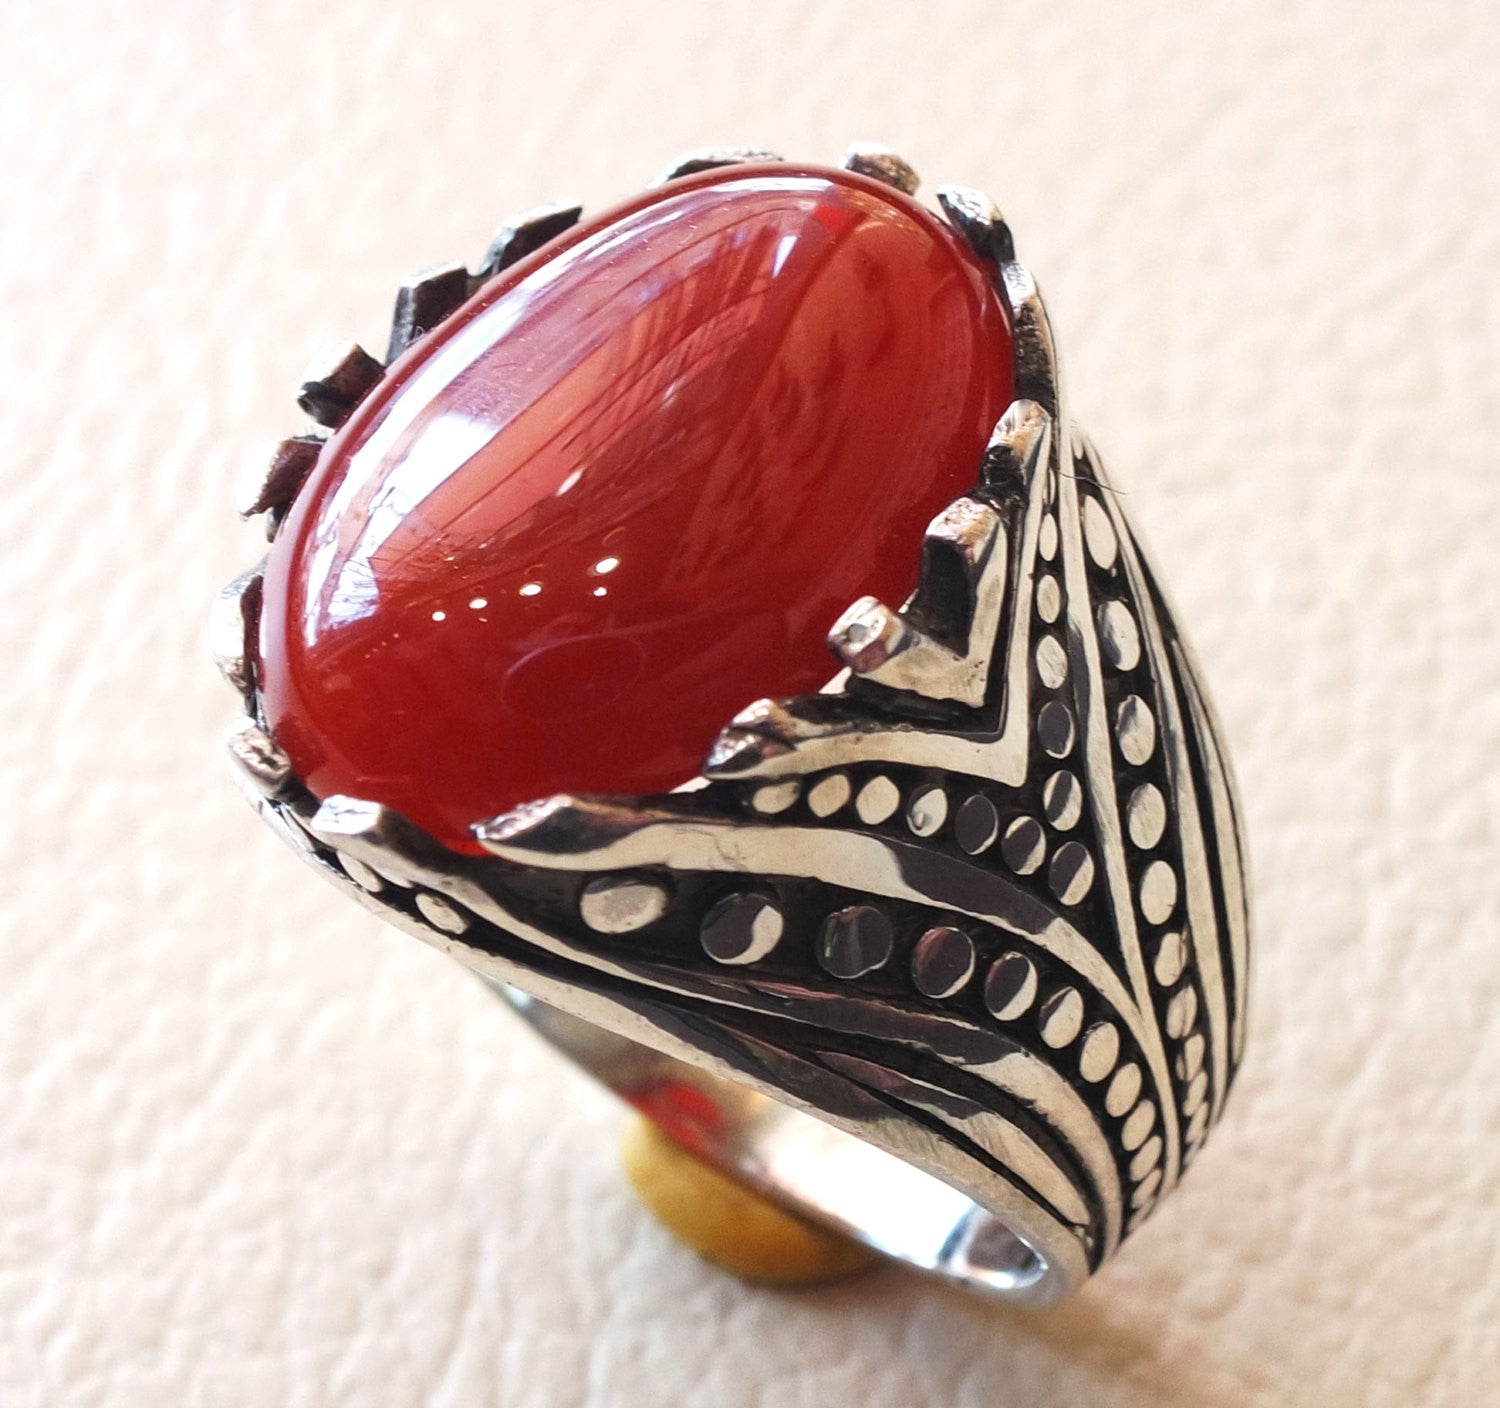 aqeeq ring sterling silver red stone carnelian agate men jewelry natural cabochon arabic turkey middle eastern ottoman style all sizes عقيق